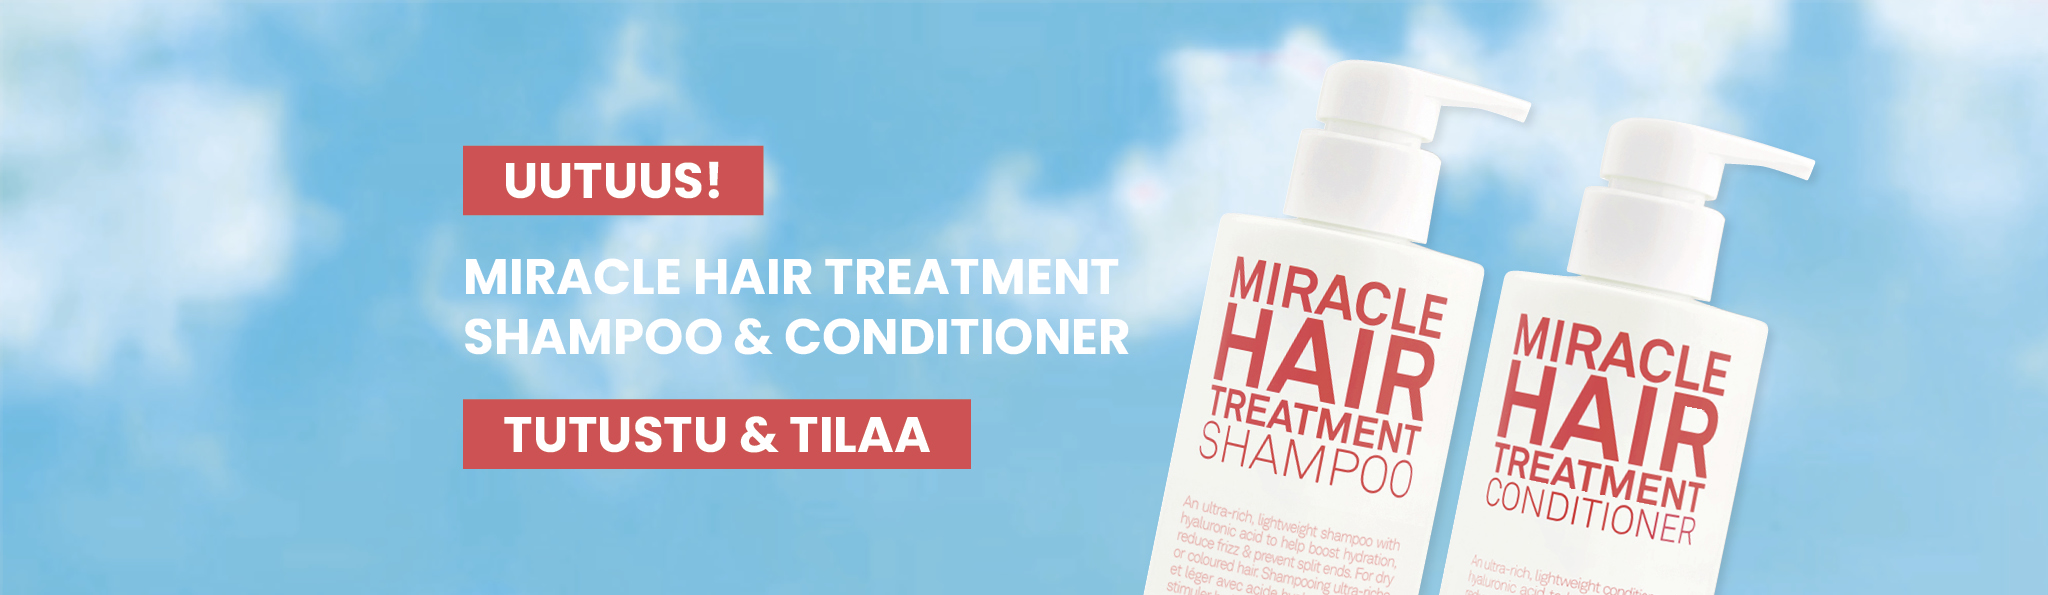 NEW_MIRACLE-HAIR-TREATMENT_SHAMPOO&CONDITIONER